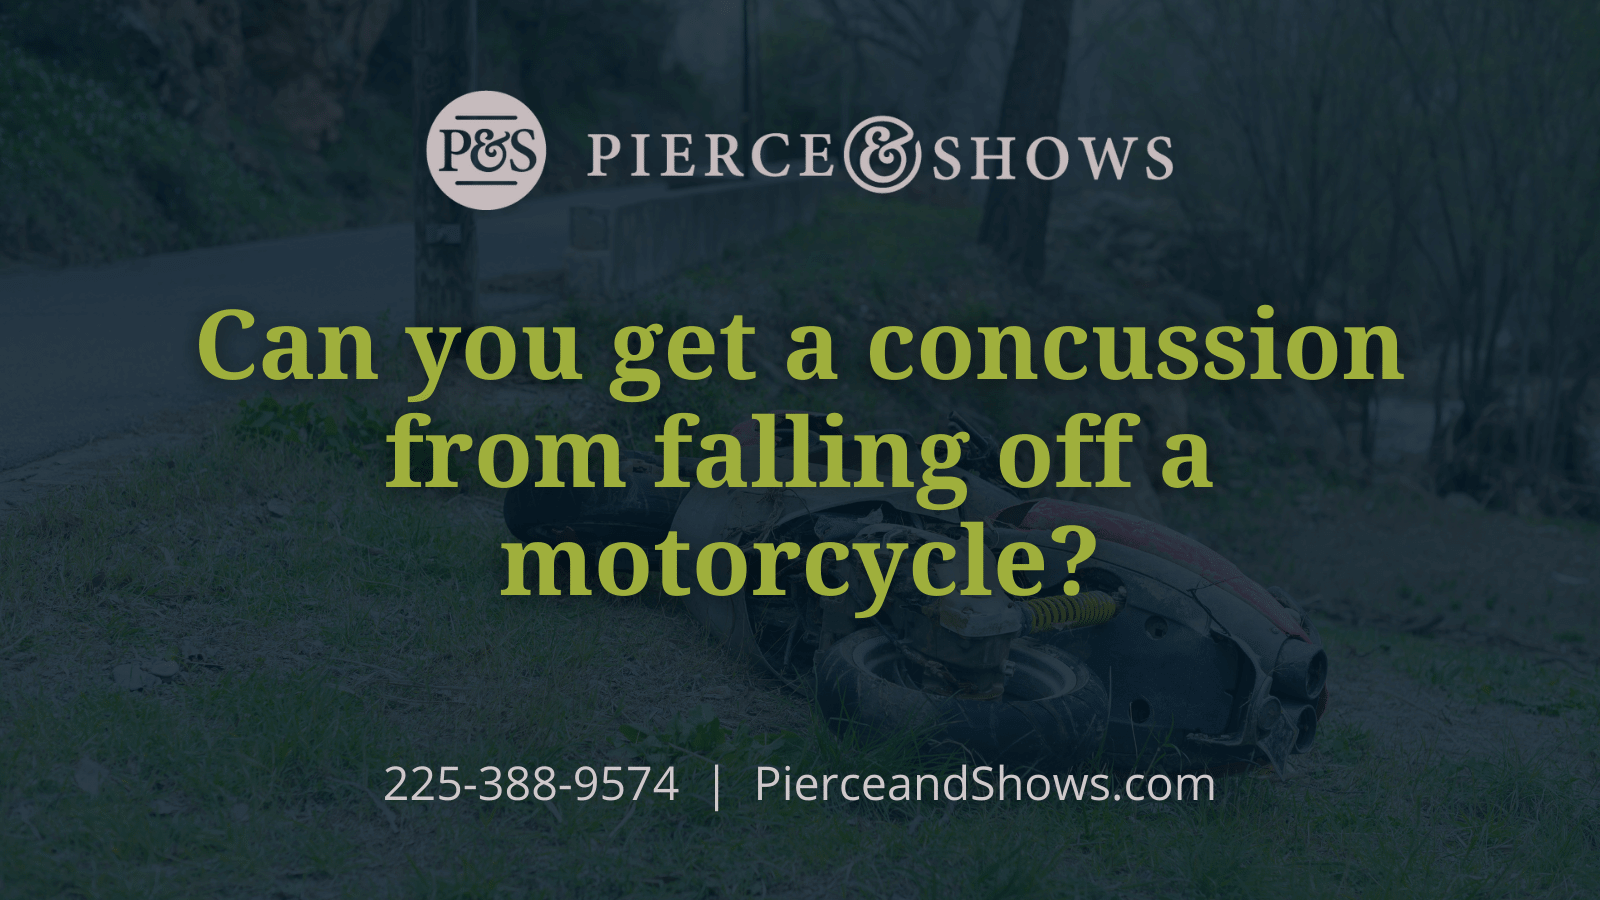 Can you get a concussion from falling off a motorcycle - Baton Rouge Louisiana injury attorney Pierce & Shows (1)